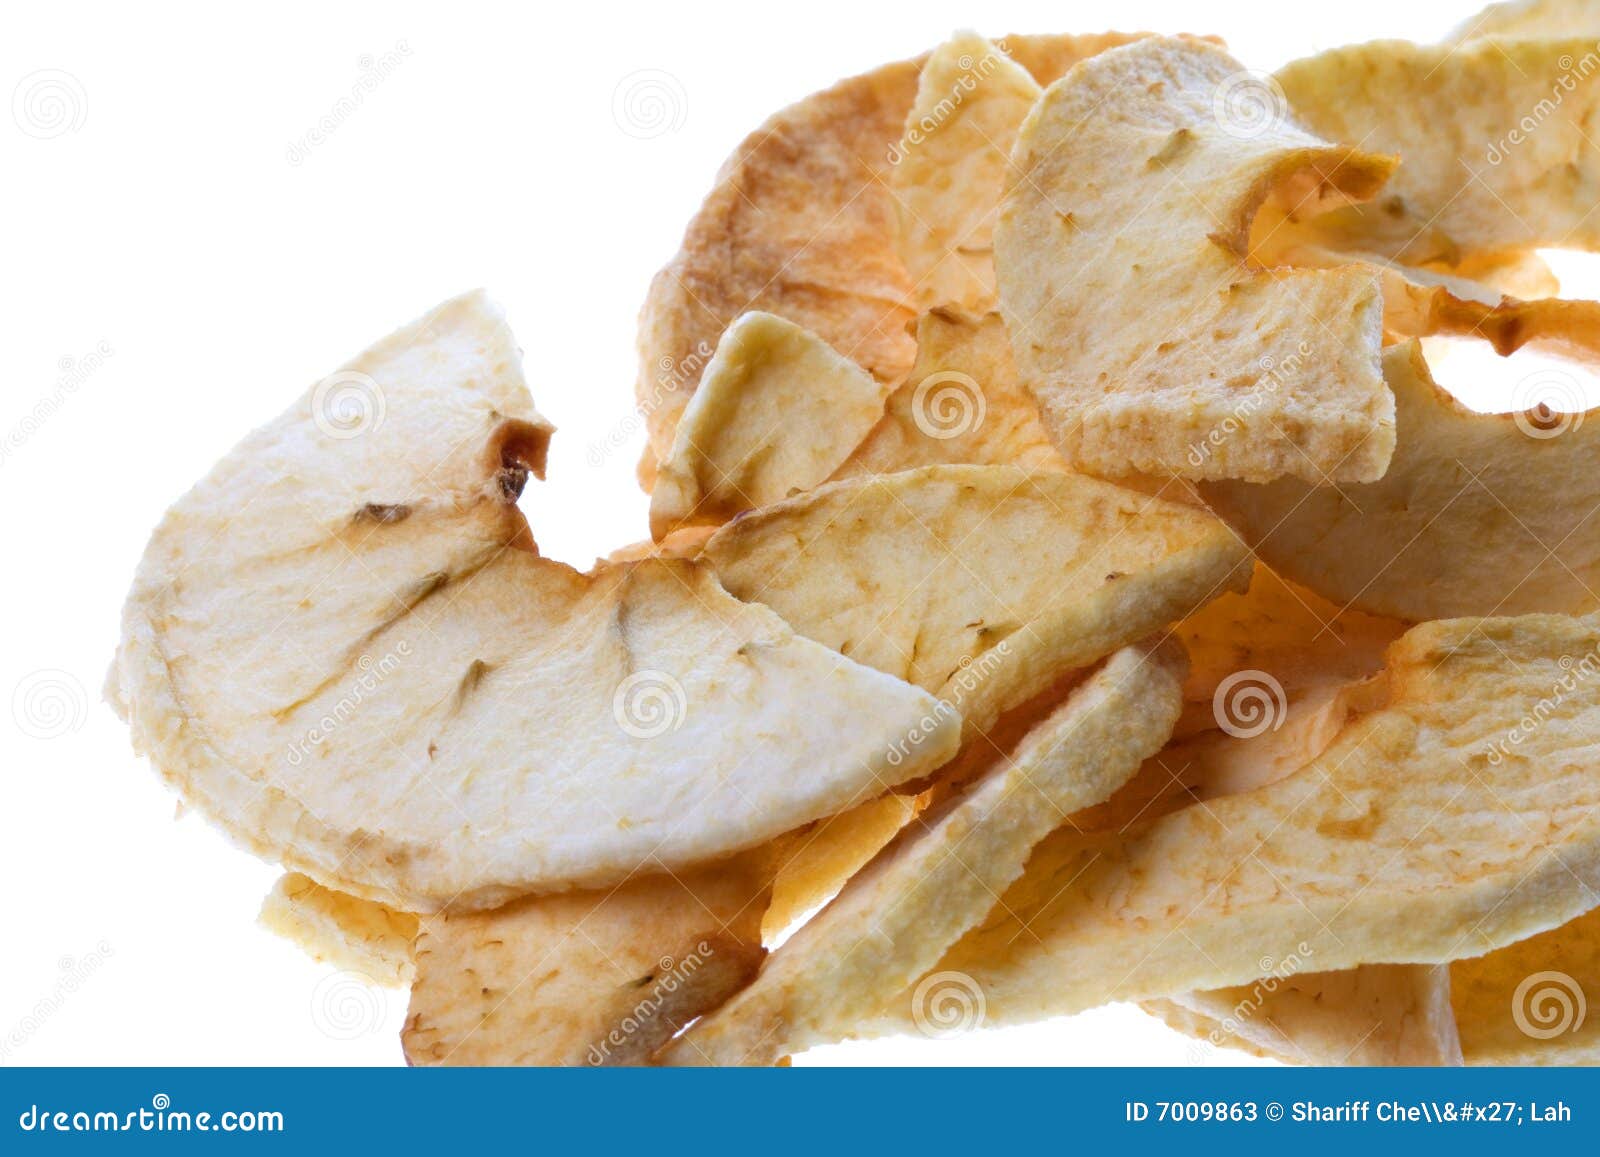 dehydrated apple slices 